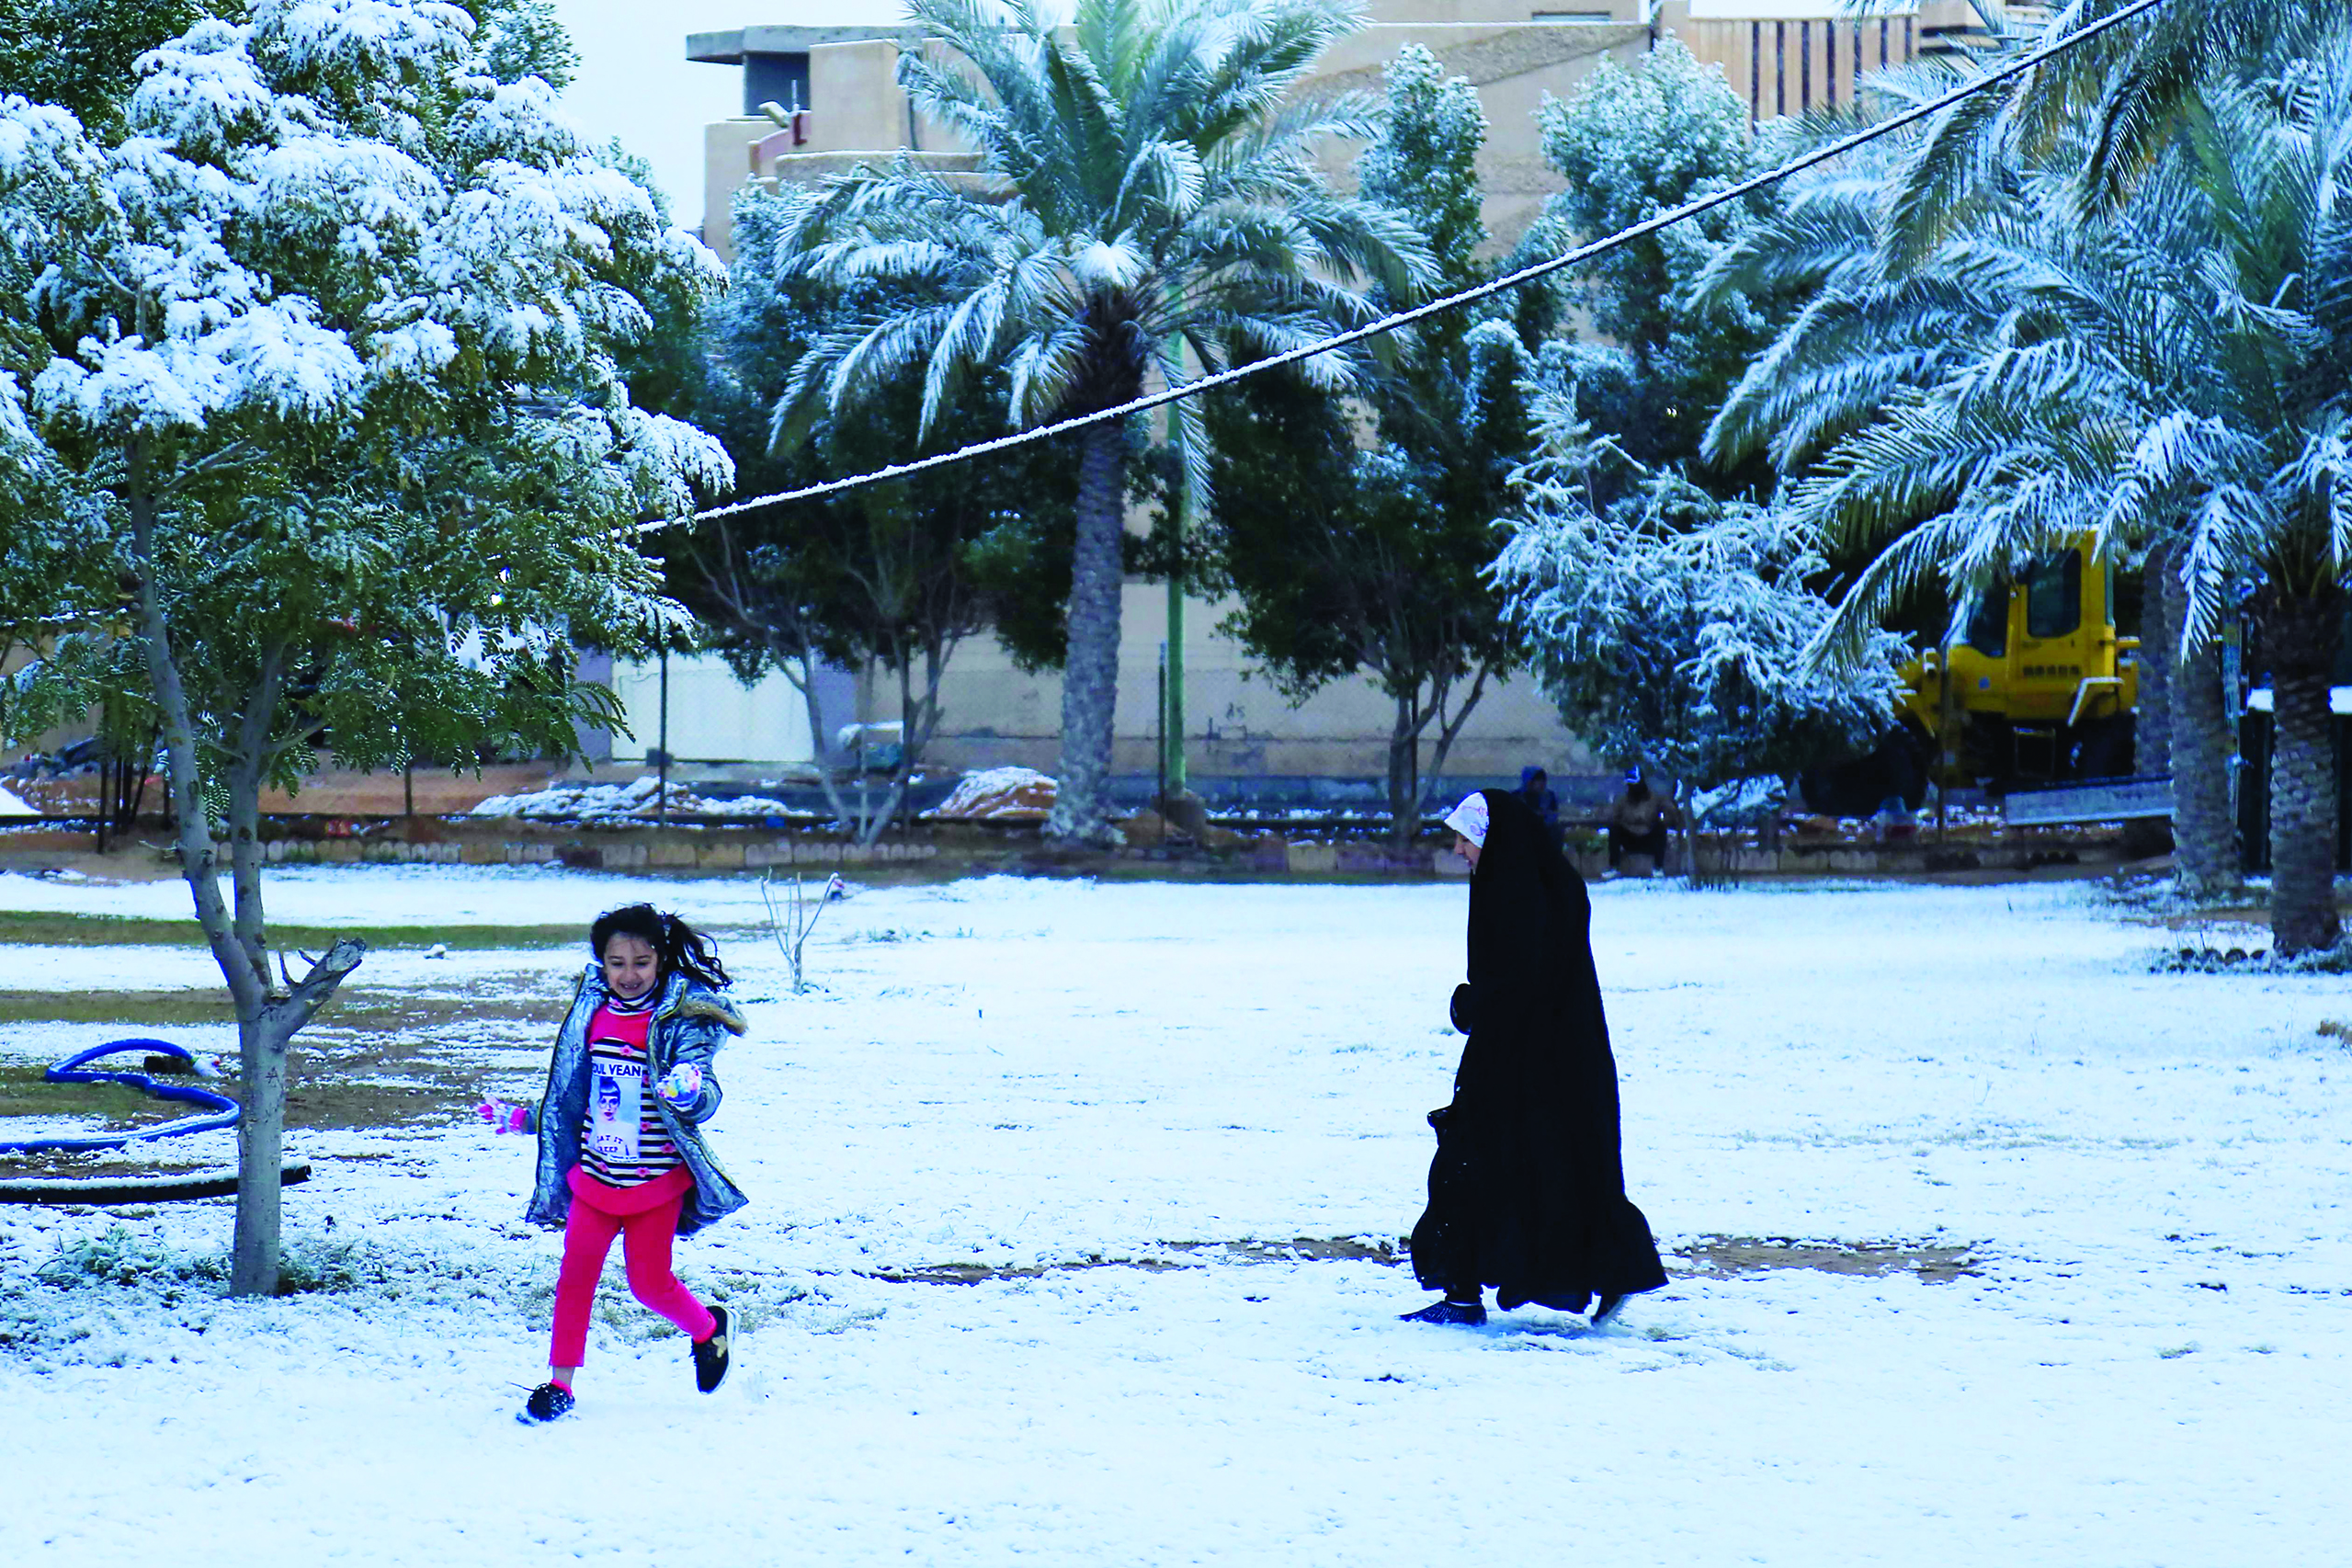 An Iraqi girl plays with her mother in the snow in the holy Shiite city of Karbala on February 11, 2020. - Iraq's capital Baghdad woke up covered in a thin layer of fresh snow, an extremely rare phenomenon for one of the world's hottest countries. Snow also covered the Shiite holy city of Karbala further south and Mosul in the north, where heavier precipitation left a blanket of snow over the city's centuries-old ruins. (Photo by Atta KENARE / AFP)